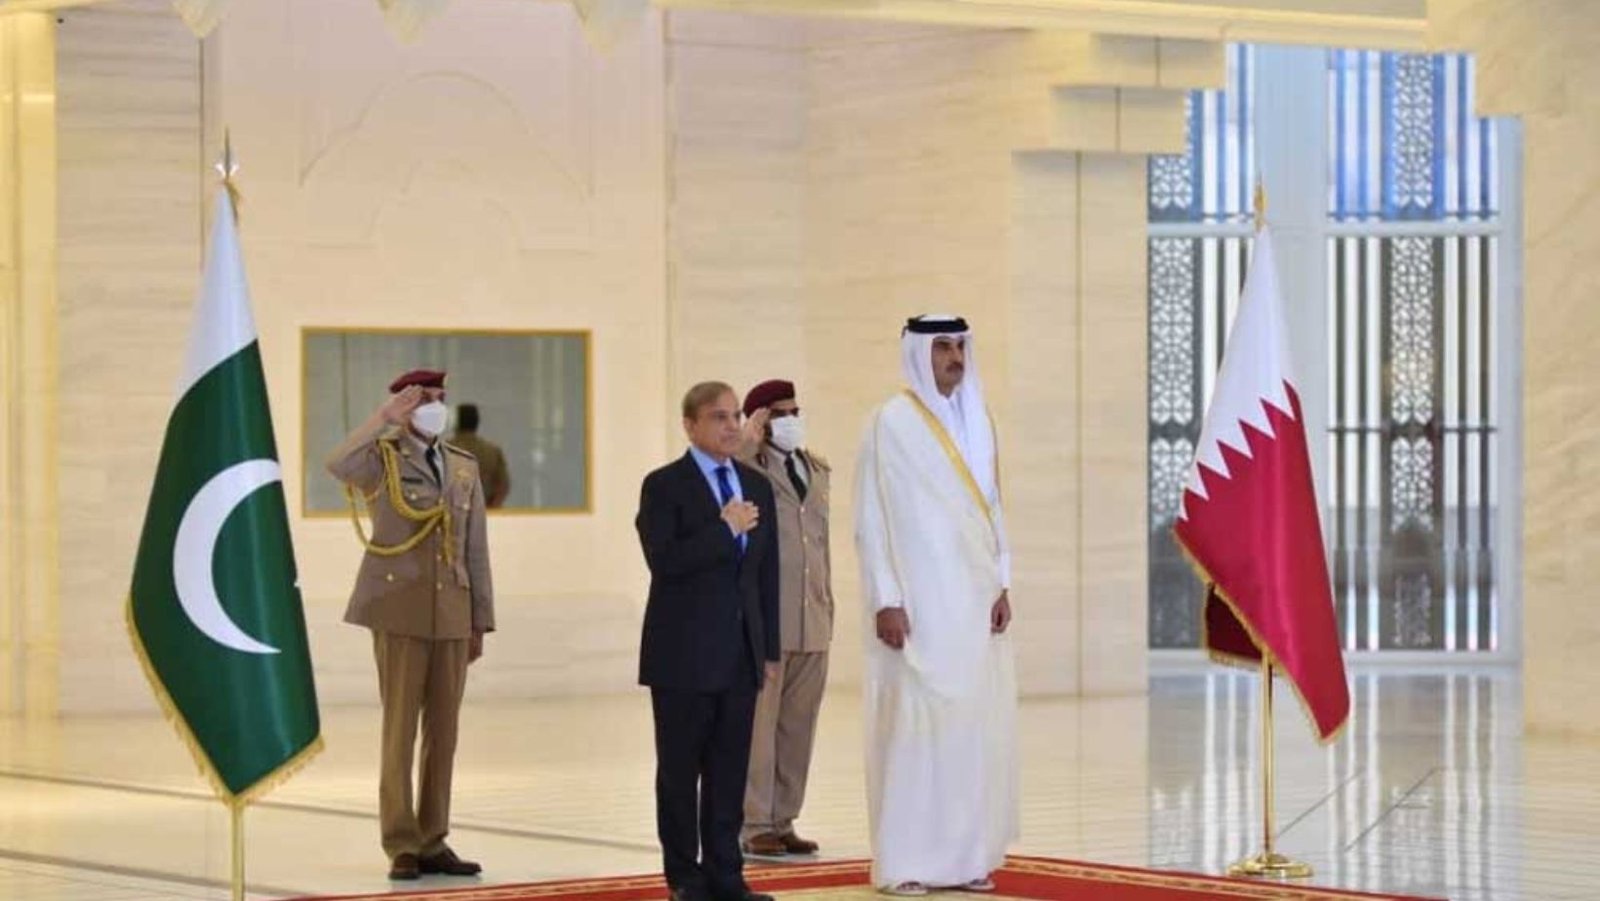 A $3 billion investment by Qatar Investment Authority is planned for Pakistan